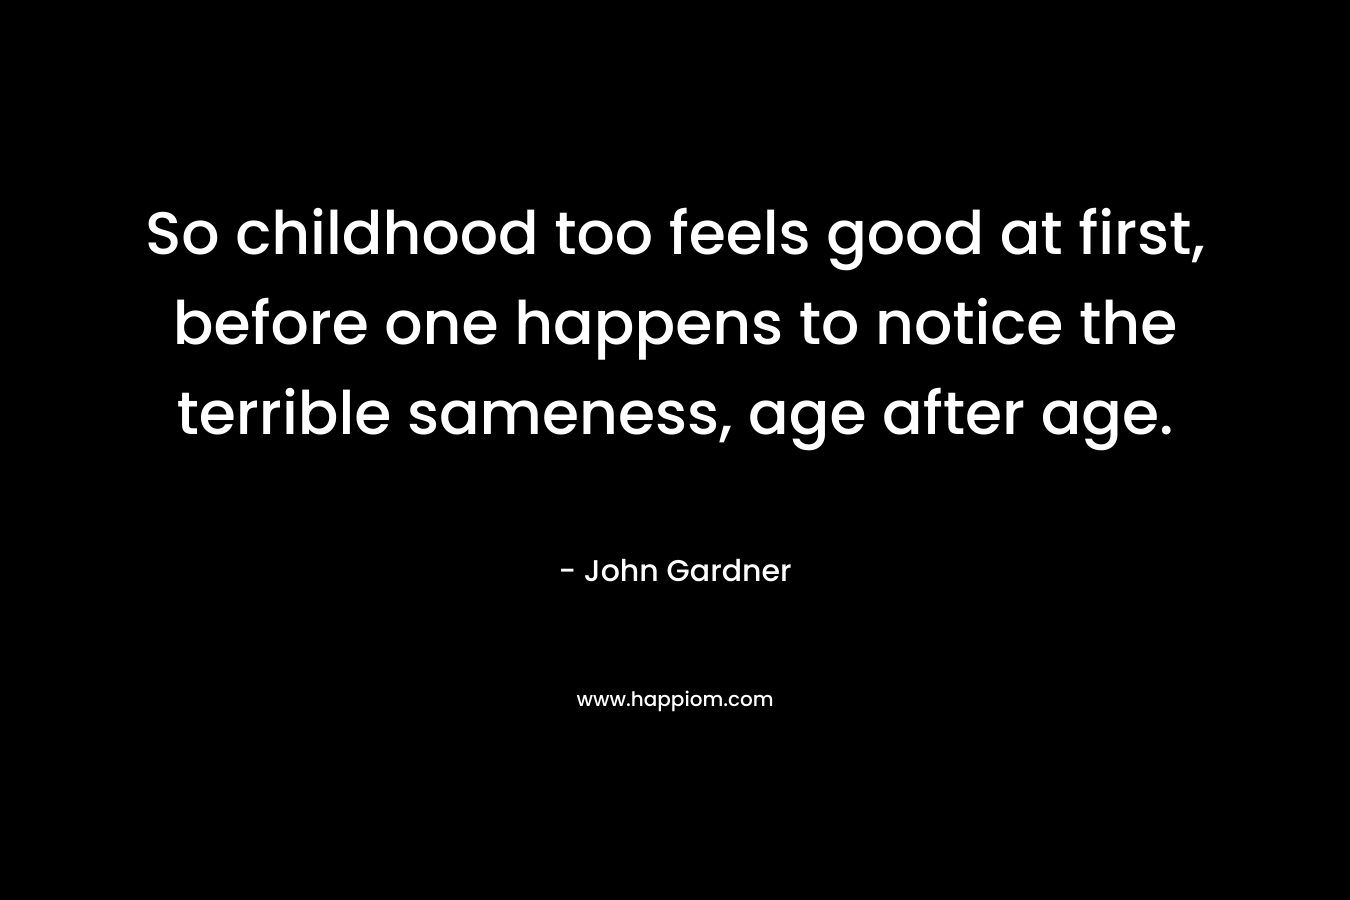 So childhood too feels good at first, before one happens to notice the terrible sameness, age after age.